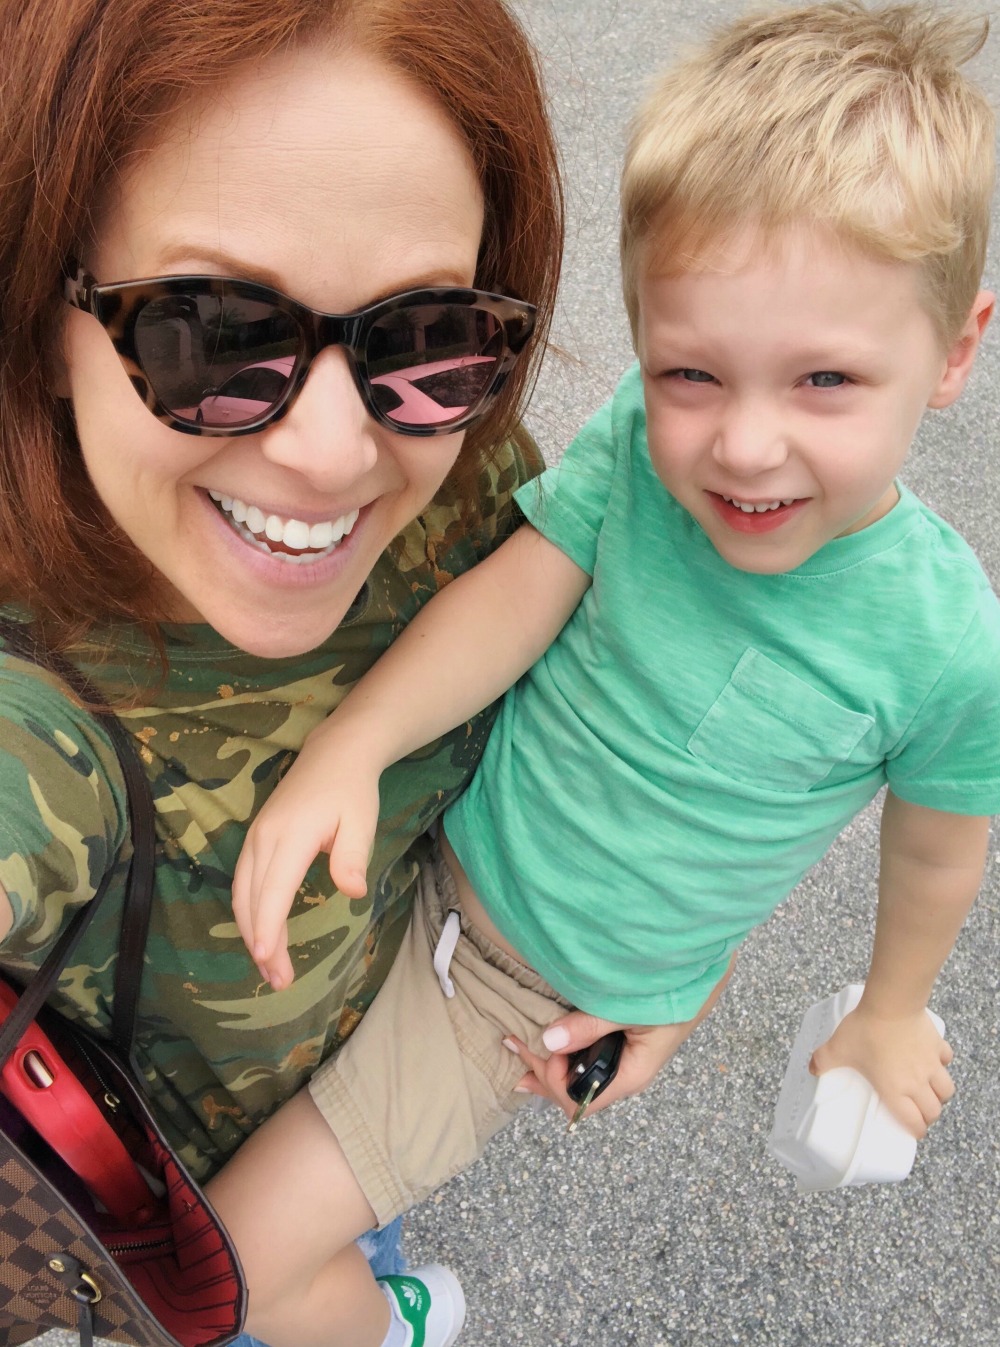 One family's adoption journey: all the things they don't tell you about adopting, from one mom who's been through the process  #adoption #family #parenting  - Our Adoption Story: What They Don't Tell You featured by popular Florida lifestyle blogger The Modern Savvy